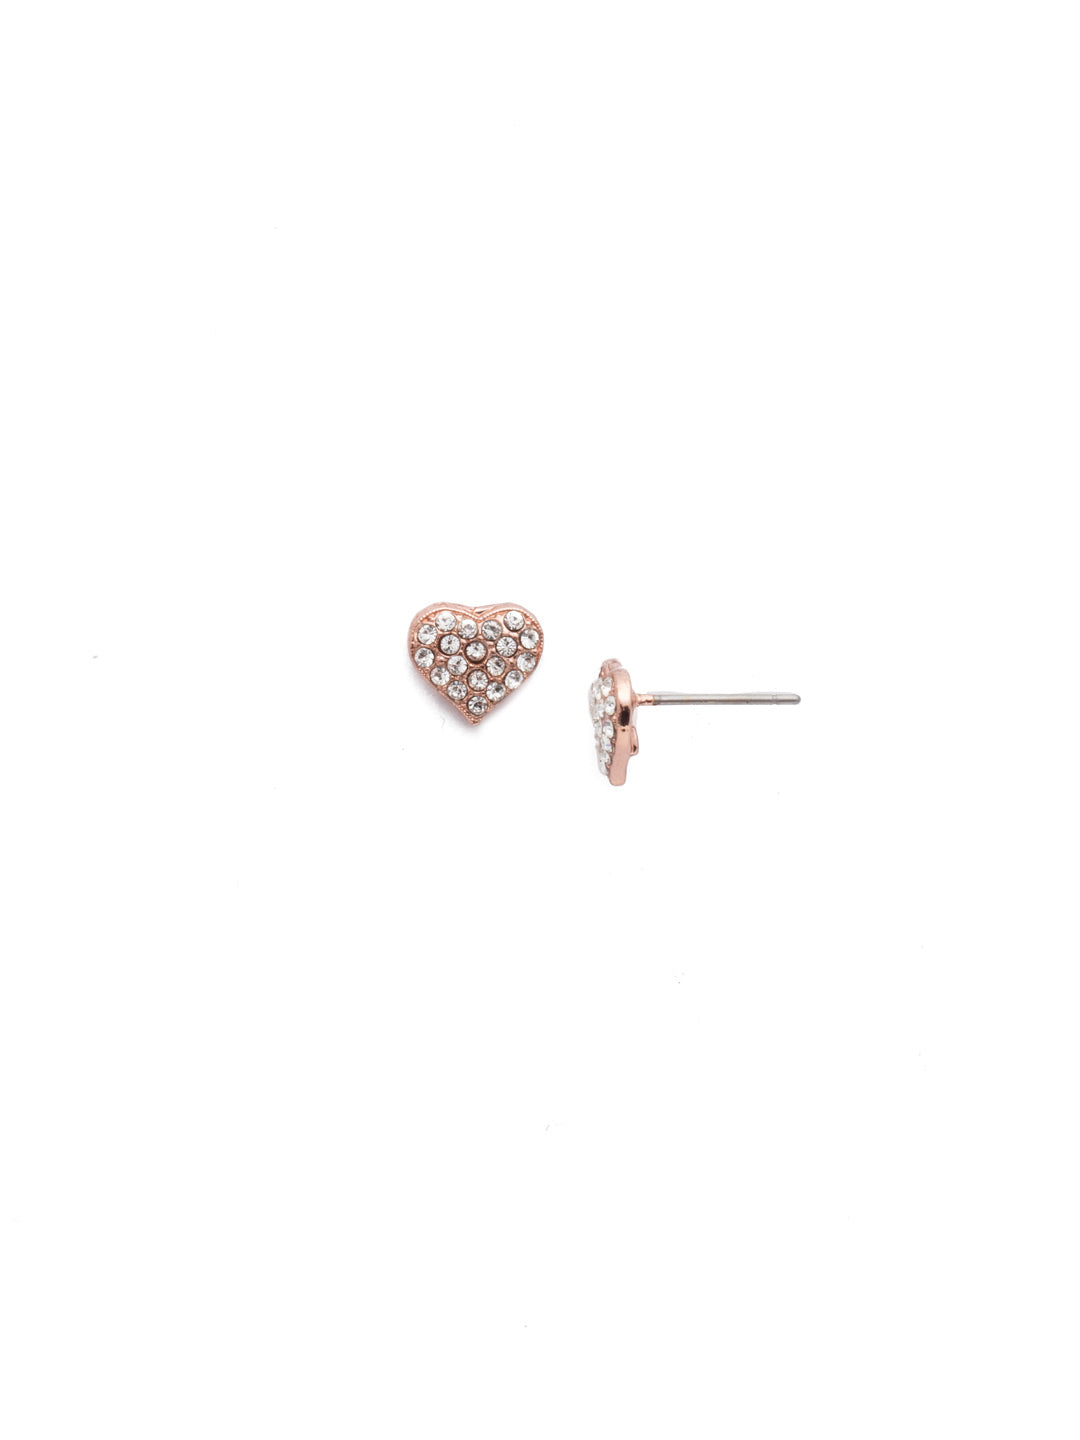 Mini Pave Heart Stud Earrings - ESP72RGCRY - <p>Heart shaped studs adorned with crystals. From Sorrelli's Crystal collection in our Rose Gold-tone finish.</p>